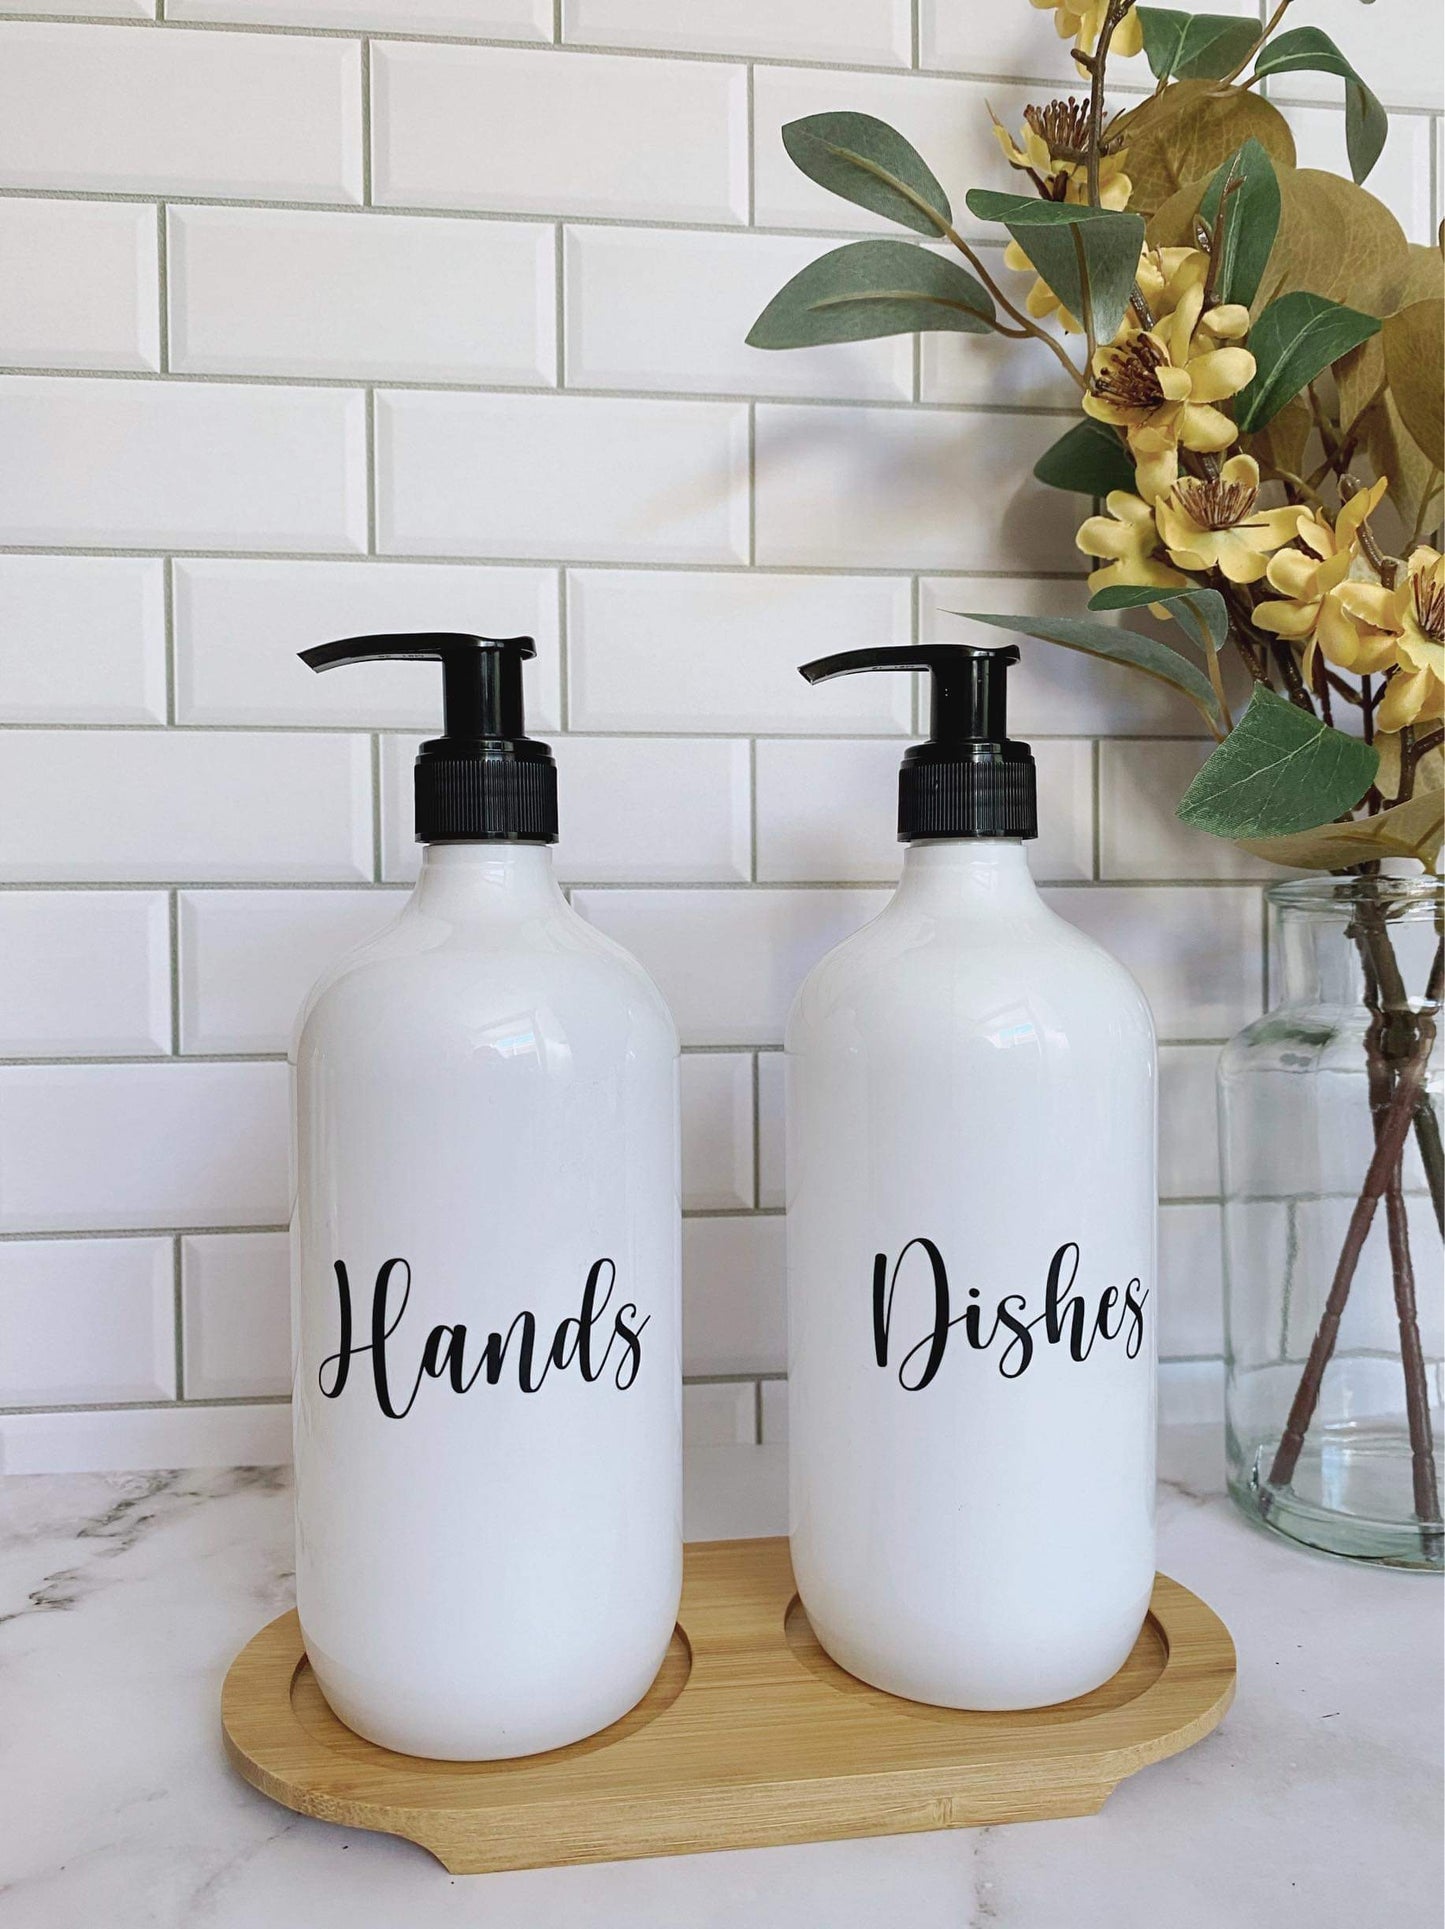 Set of 2 Elegant White Hands and Dishes Soap Dispensers Active